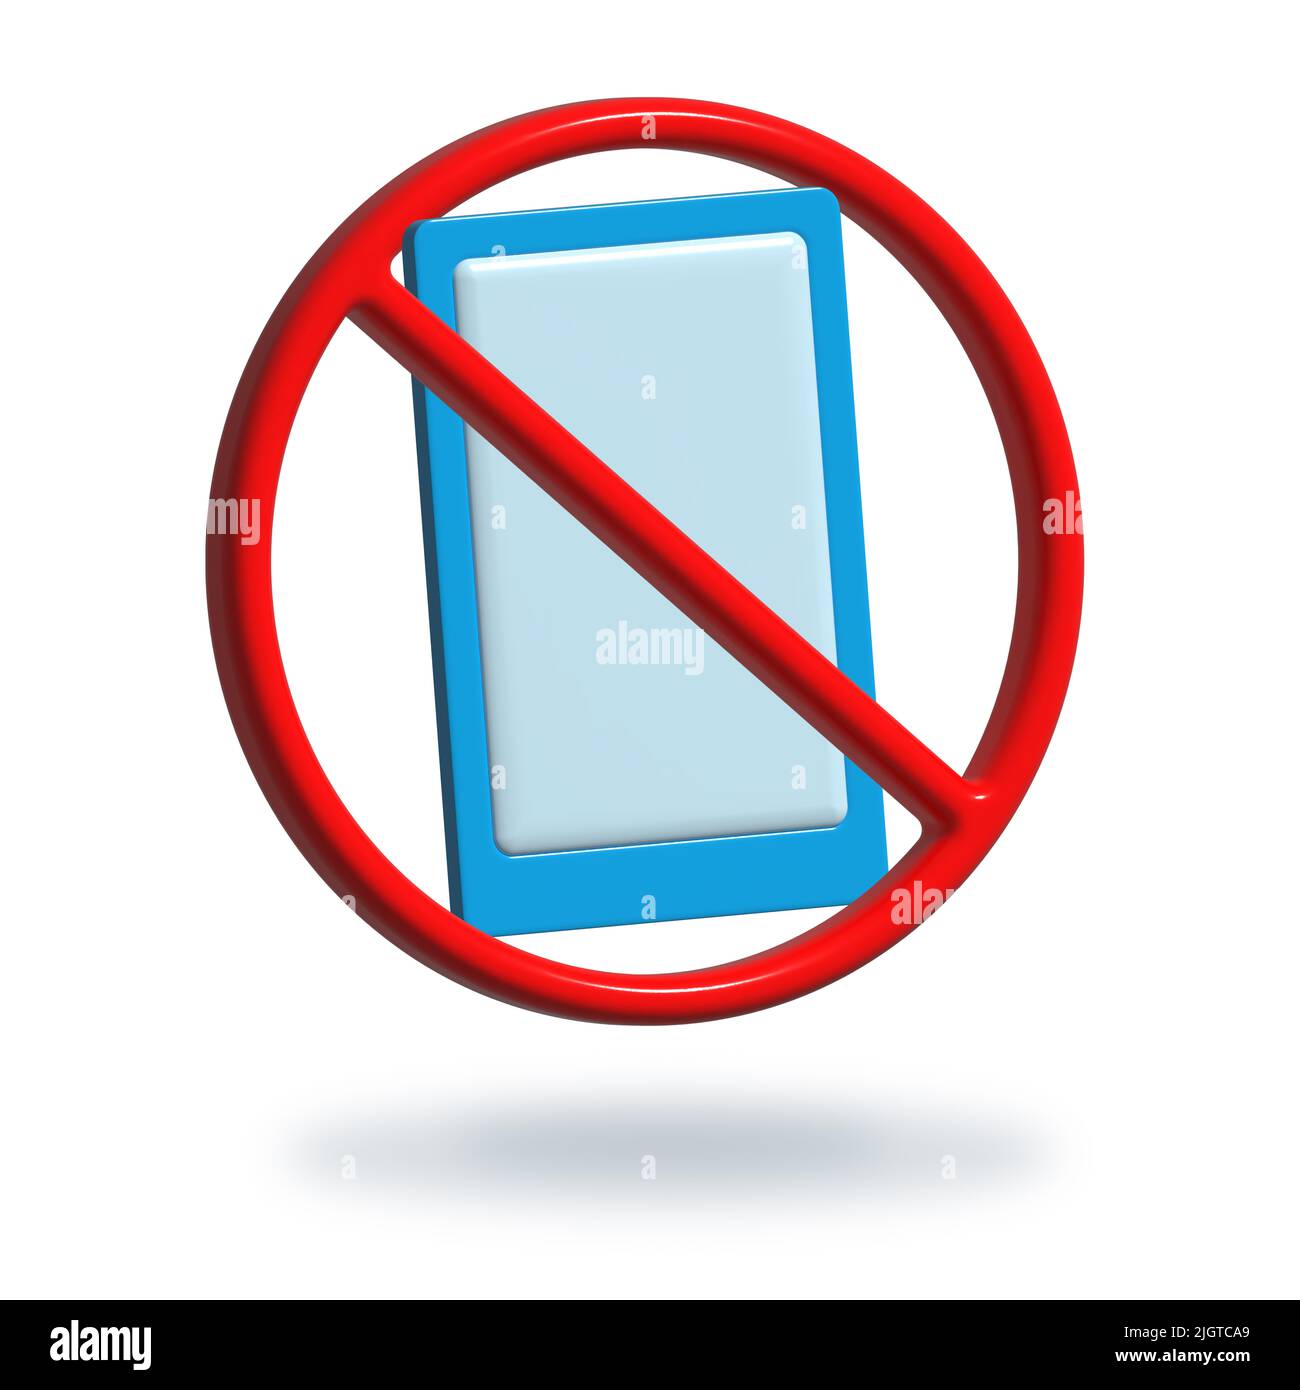 Device free zone icon, stop using smartphone and digital devices for digital detox, technology free zone Stock Photo